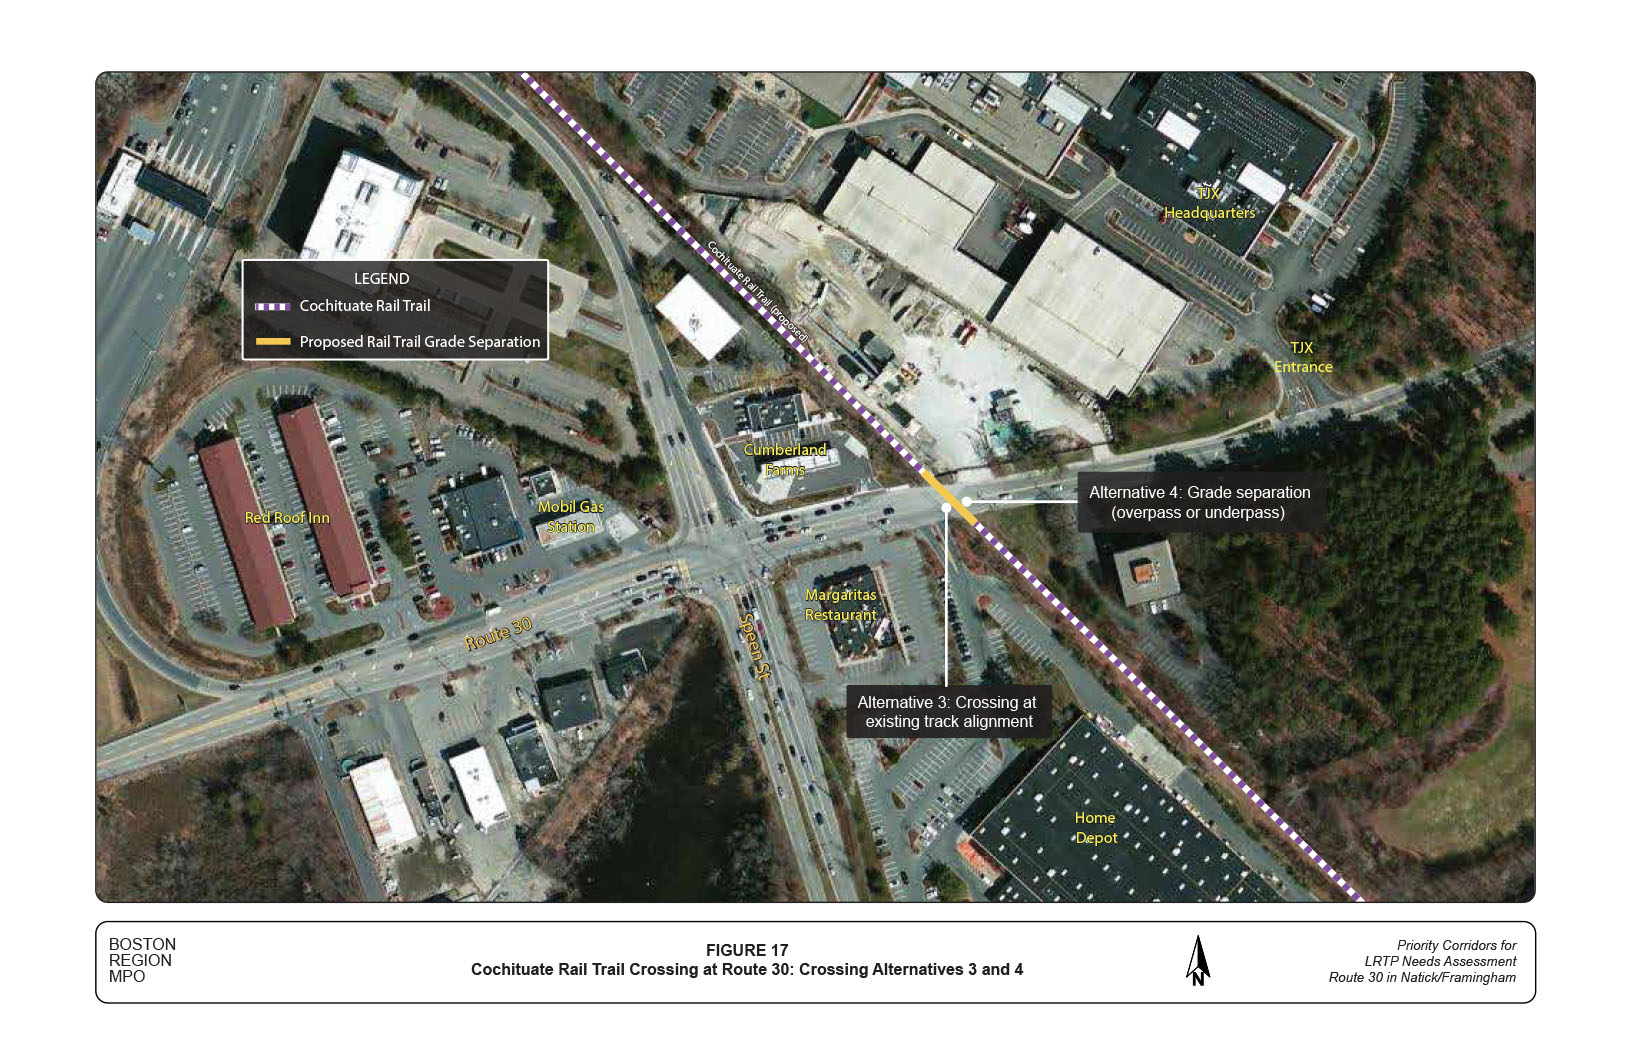 FIGURE 17. Aerial-view map that illustrates the Cochituate Rail Trail crossing at “Alternative 3” (the existing track alignment), and at “Alternative 4” (a pedestrian bridge).